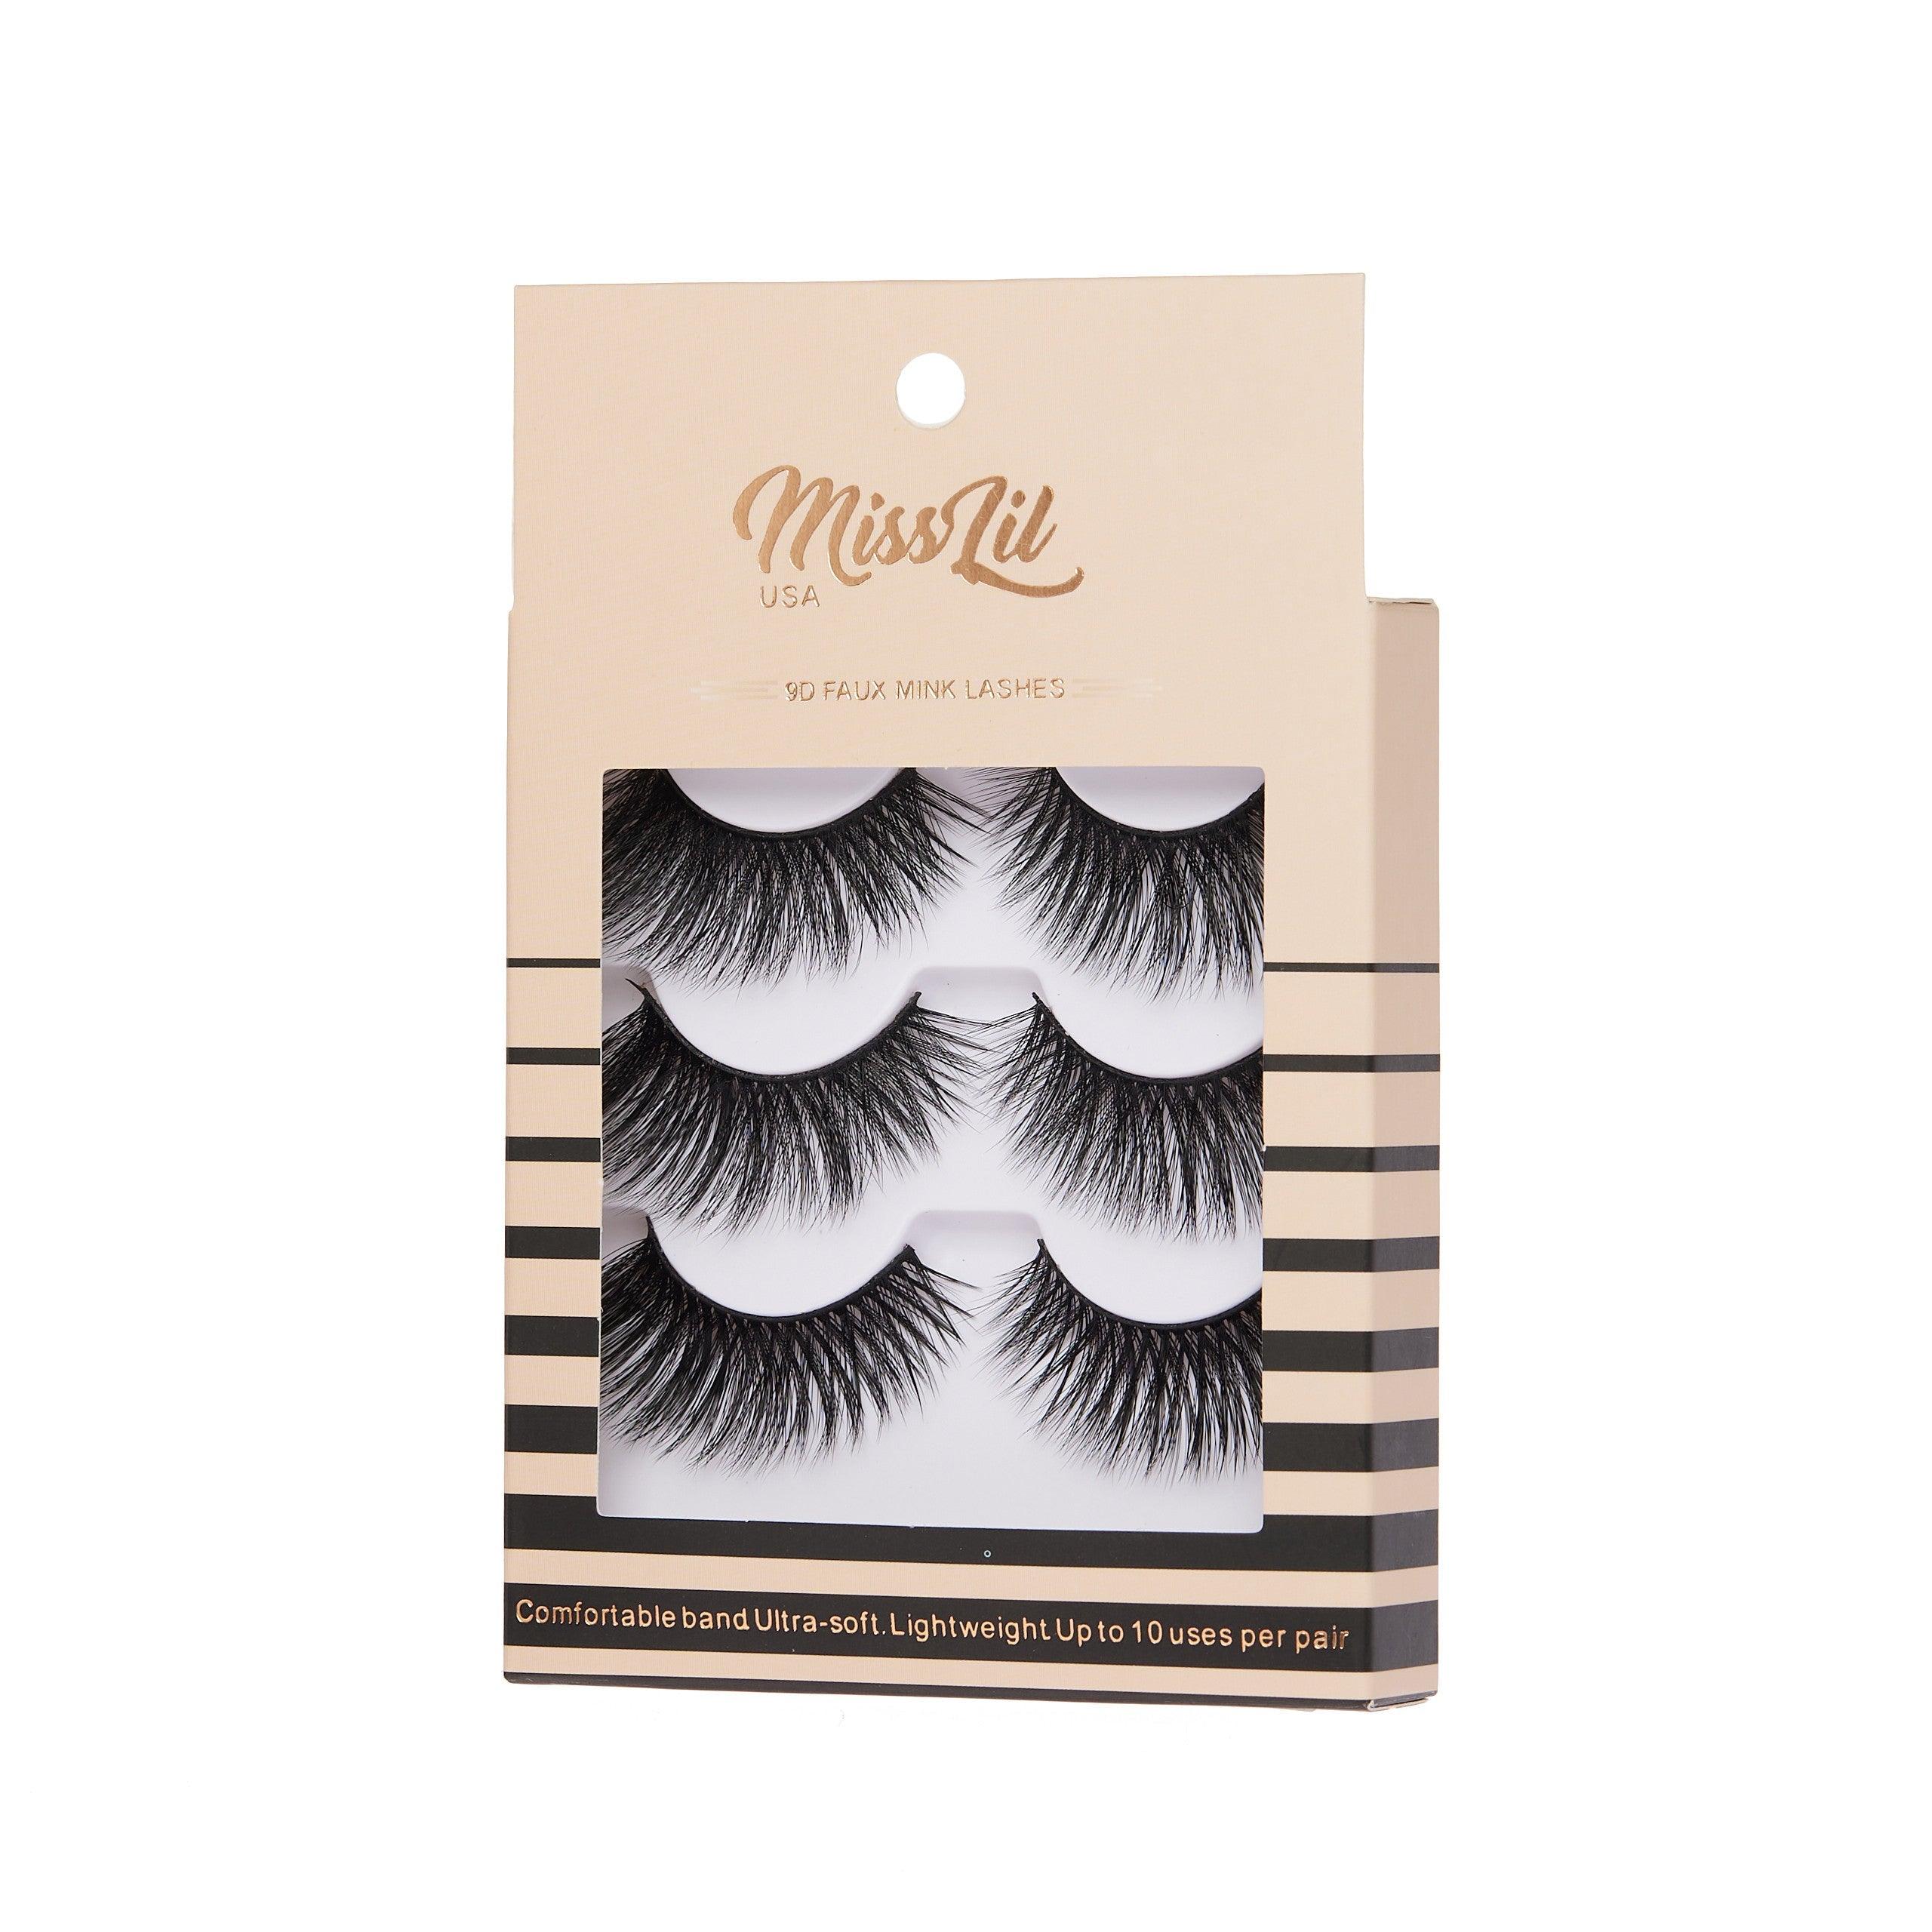 3-Pair Faux 9D Mink Eyelashes - Luxury Collection #6 - Pack of 12 - Miss Lil USA